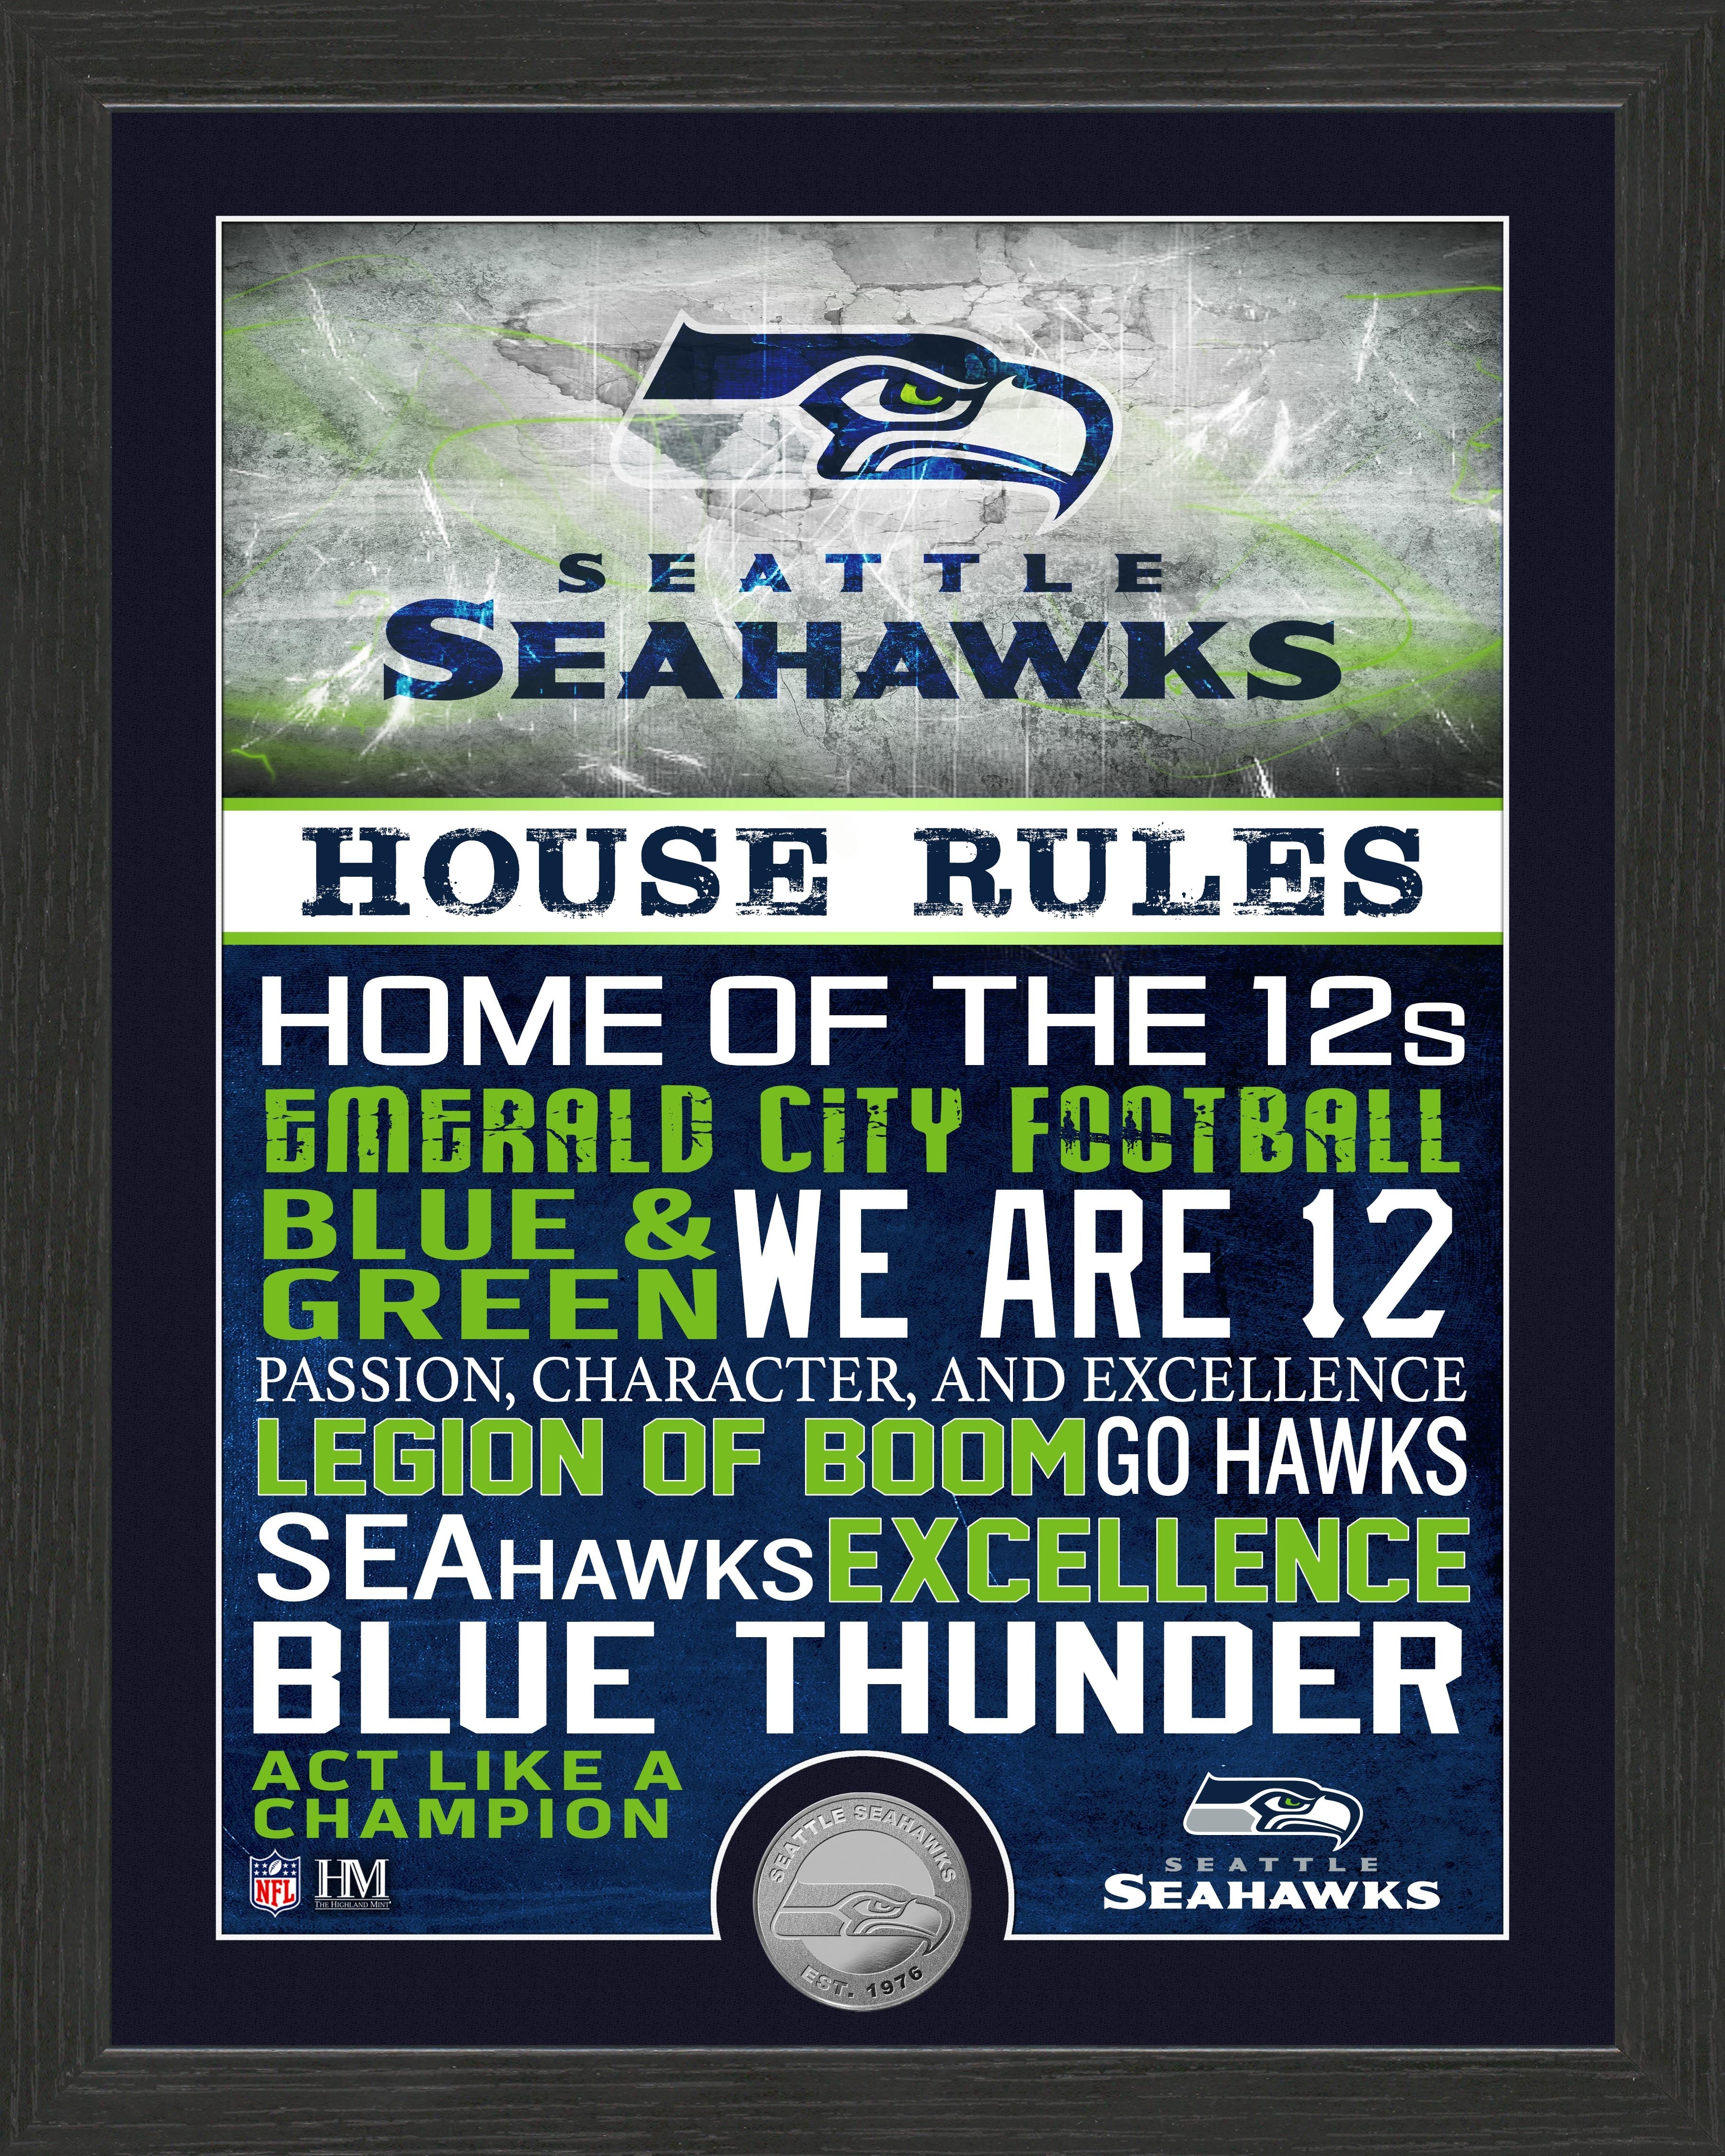 Seattle Seahawks House Rules Minted Coin Photo Mint